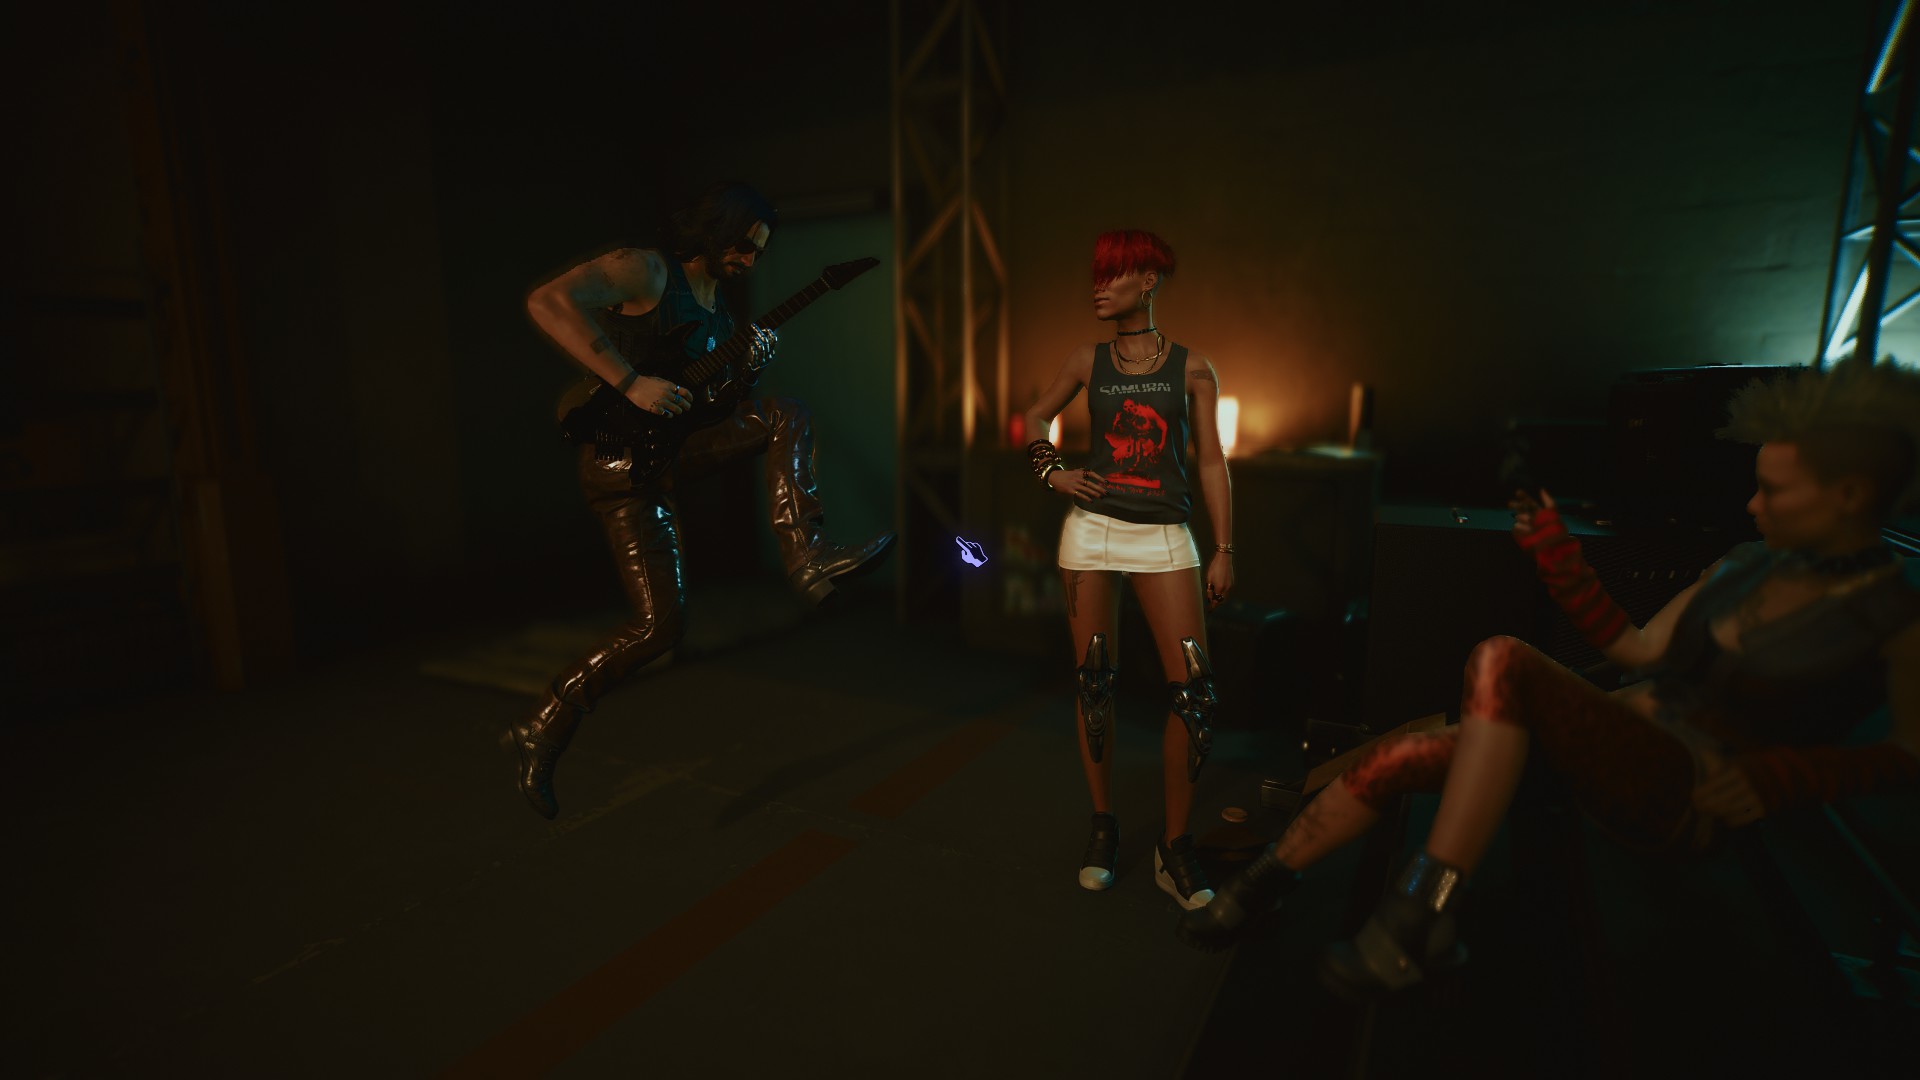 Johnny Silverhand, a rockerboy from Cyberpunk 2077, hits a sick riff in front of two unimpressed looking ladies.